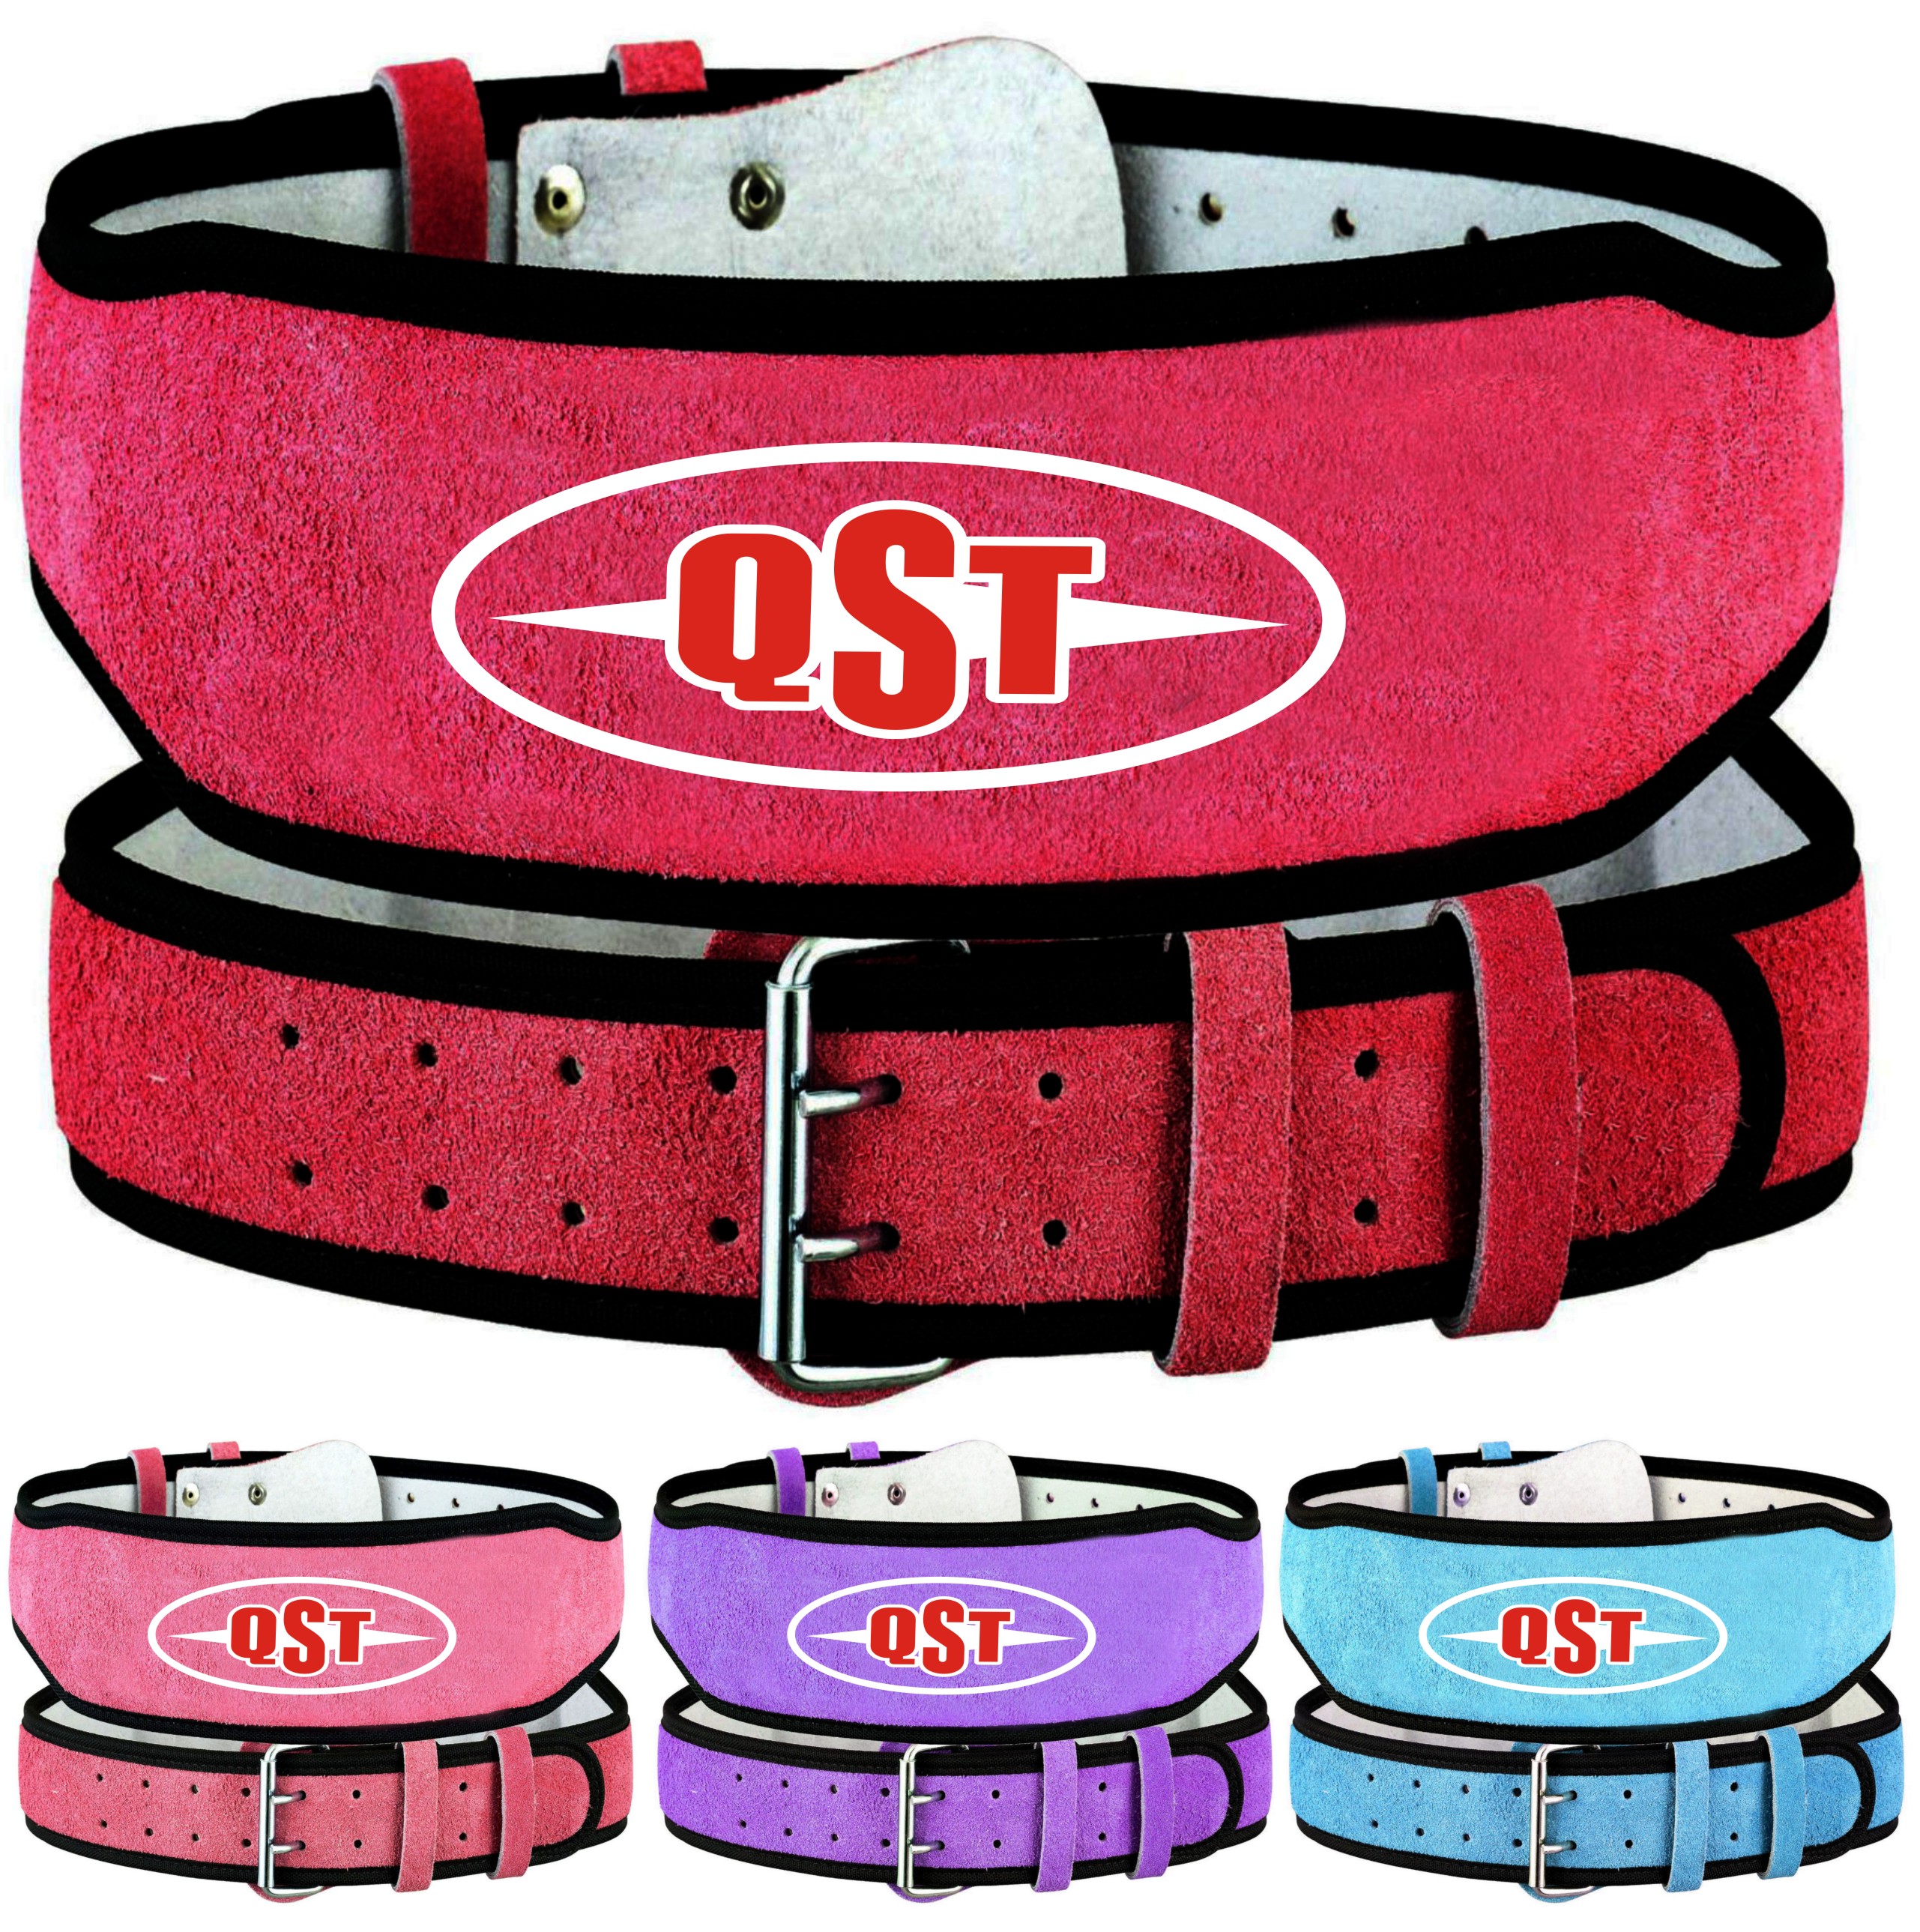 Leather Weightlifting Belt - ACS-1542